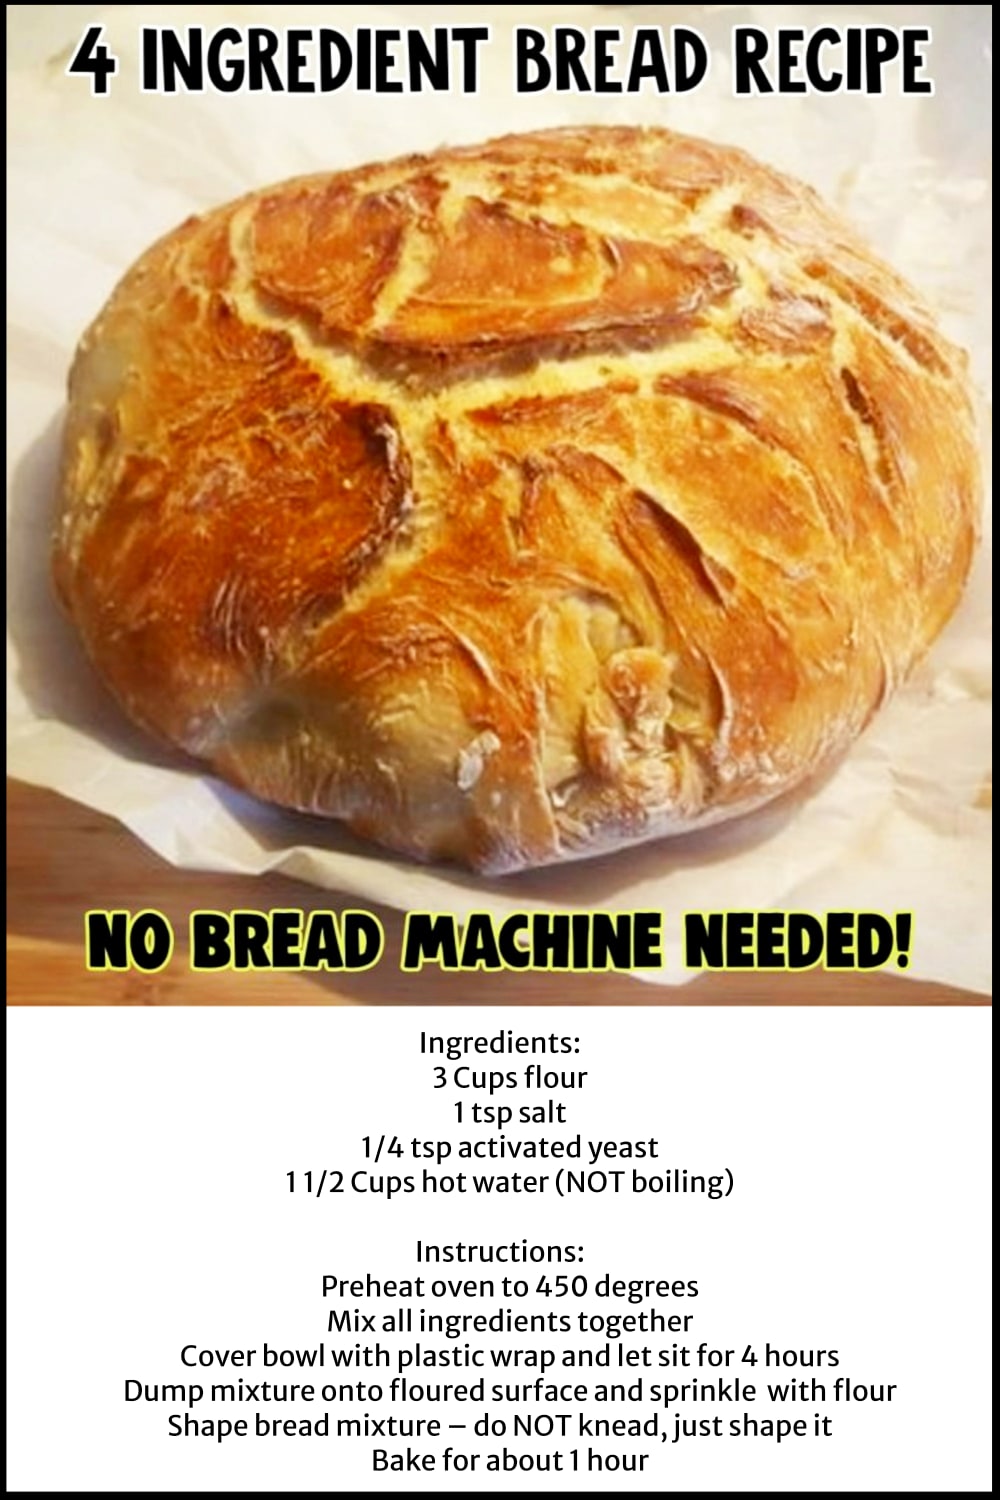 Best homemade bread recipe-NO machine needed. THis simple 4 ingredient bread recipe does NOT require a bread maker or bread machine - and NO KNEADING required either